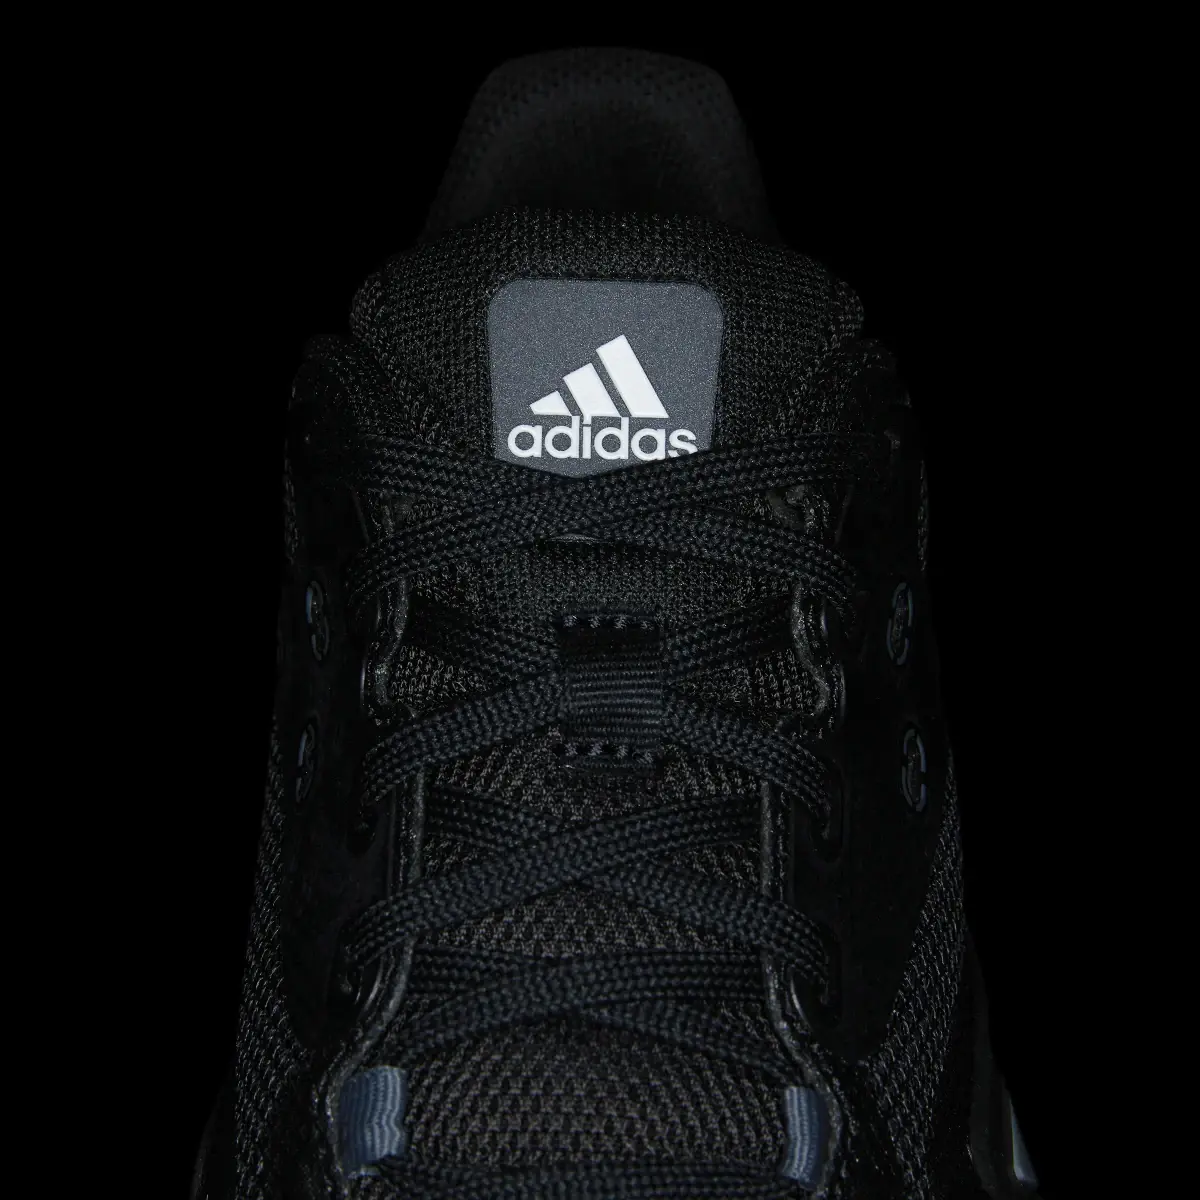 Adidas Dropset Trainers. 3